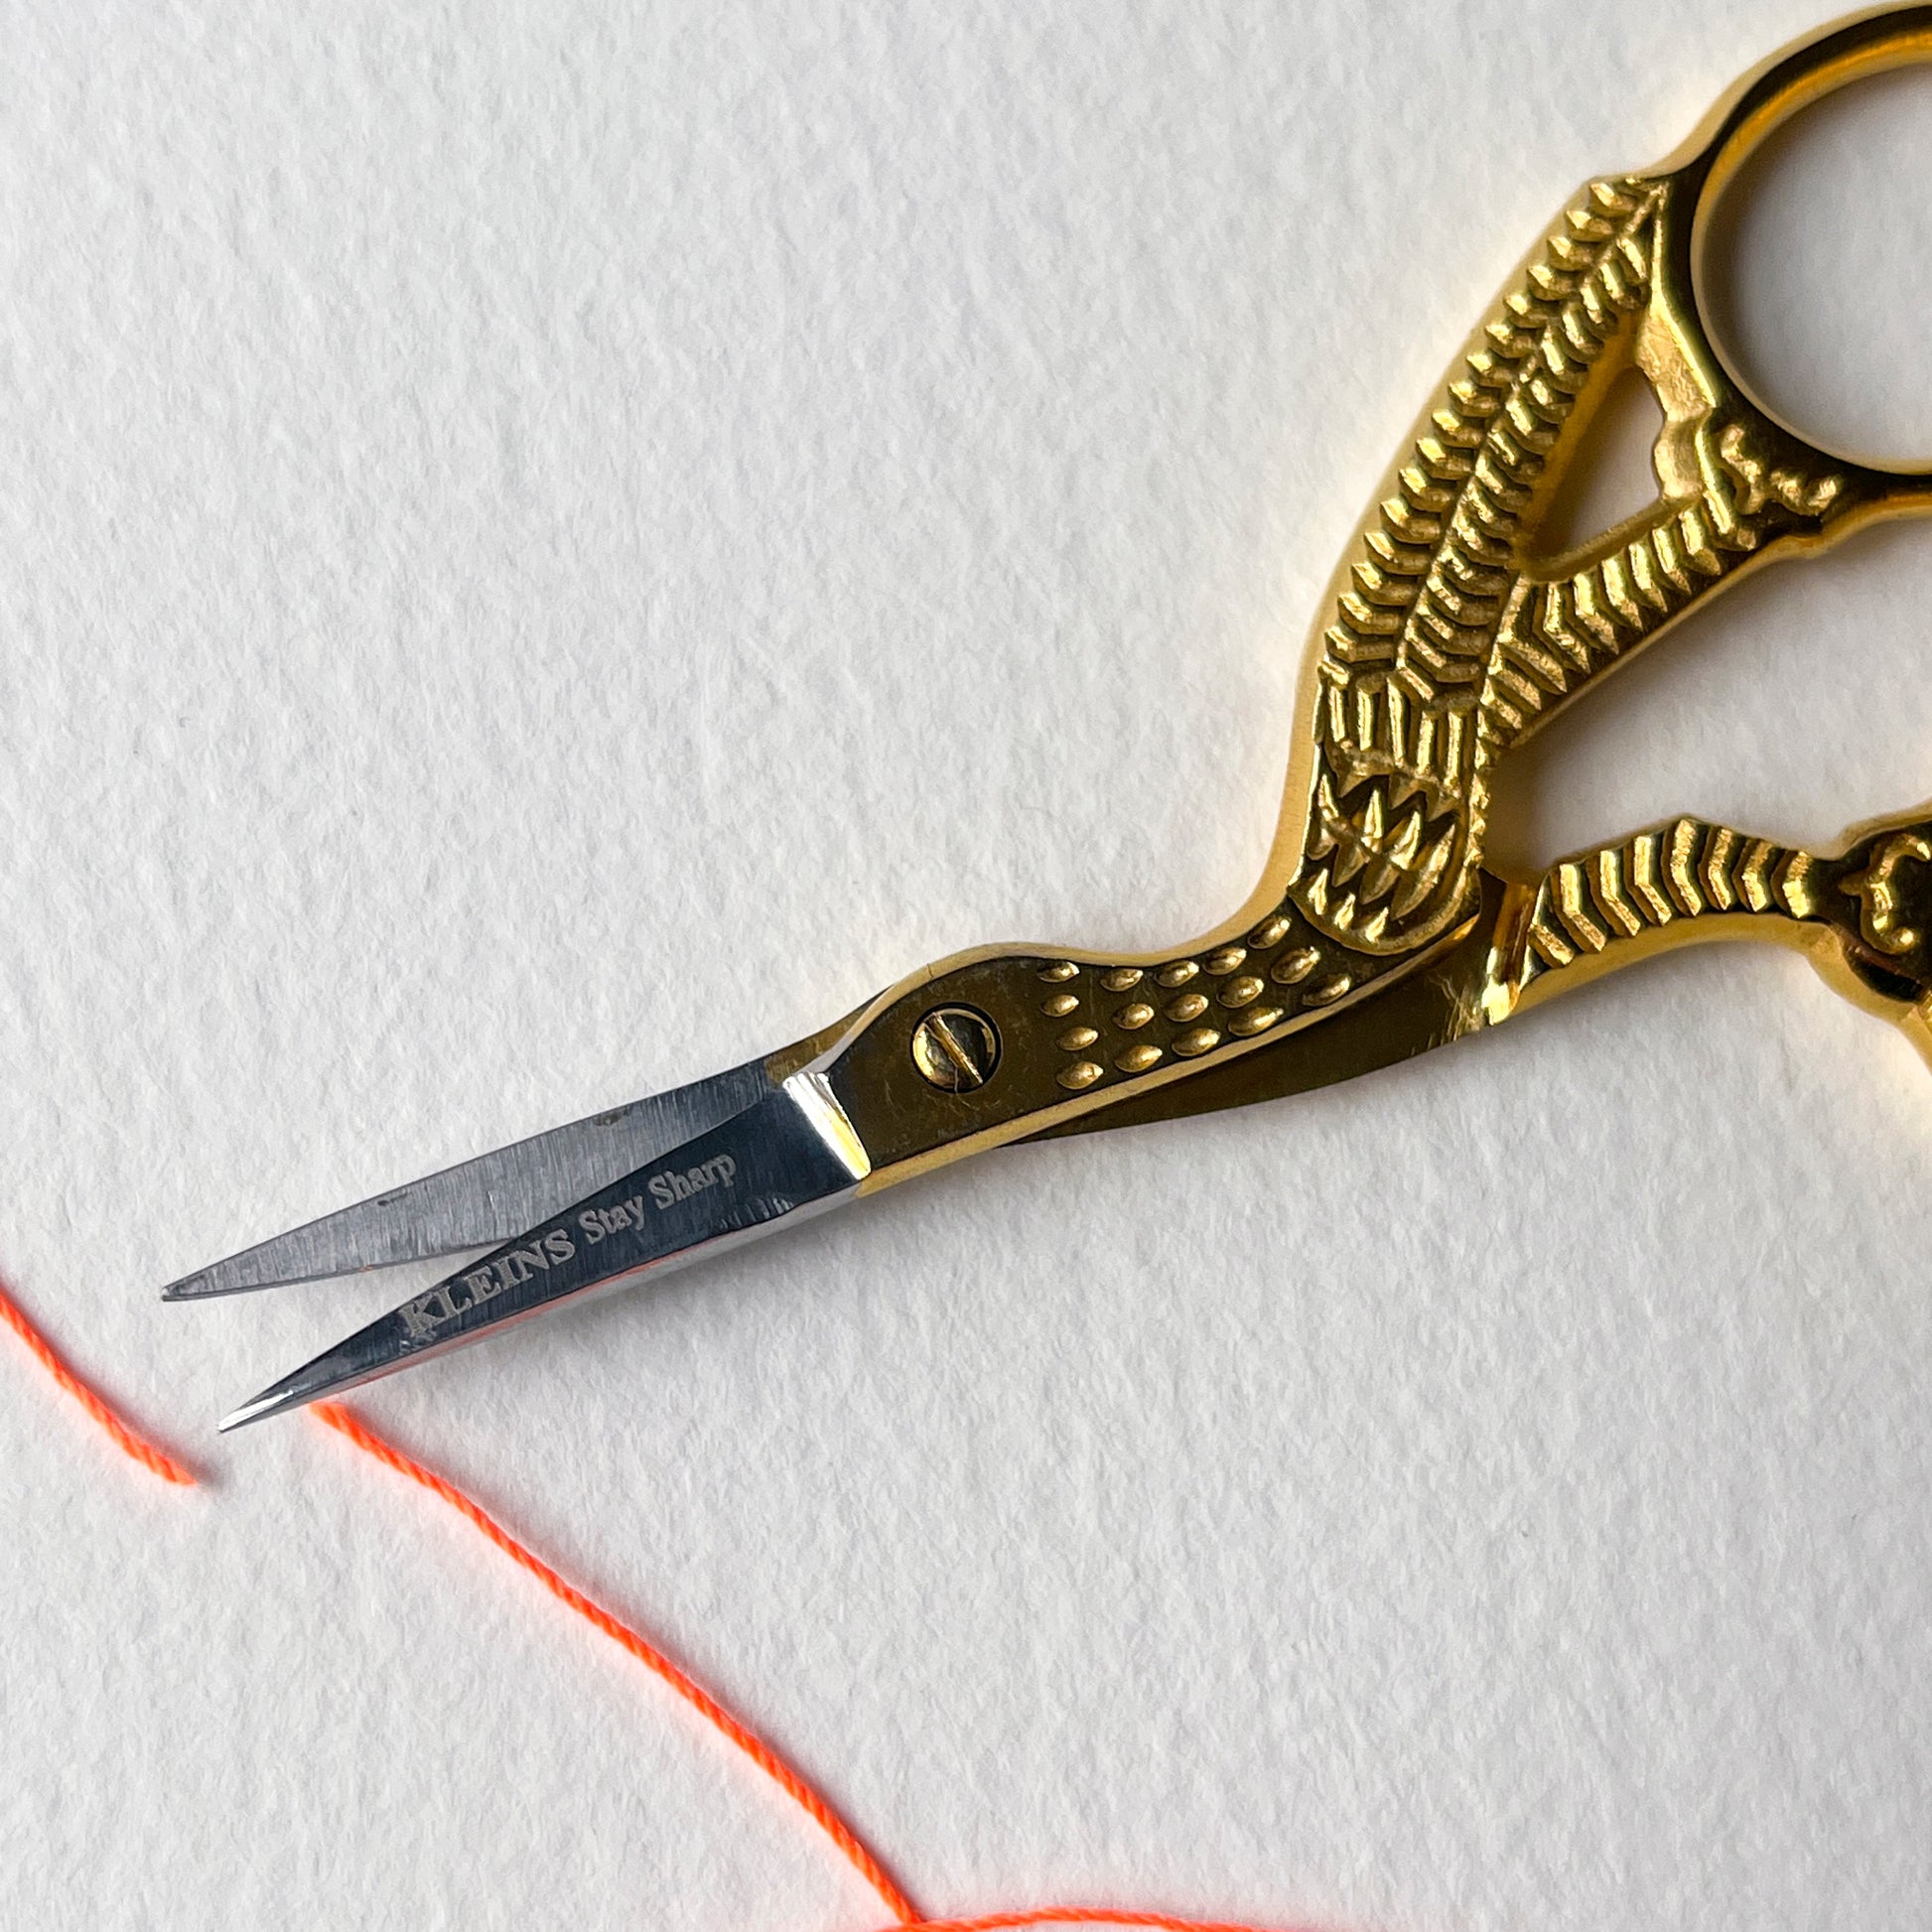 Gold stork embroidery scissors, perfect for the professional sewist or the home dressmaker.